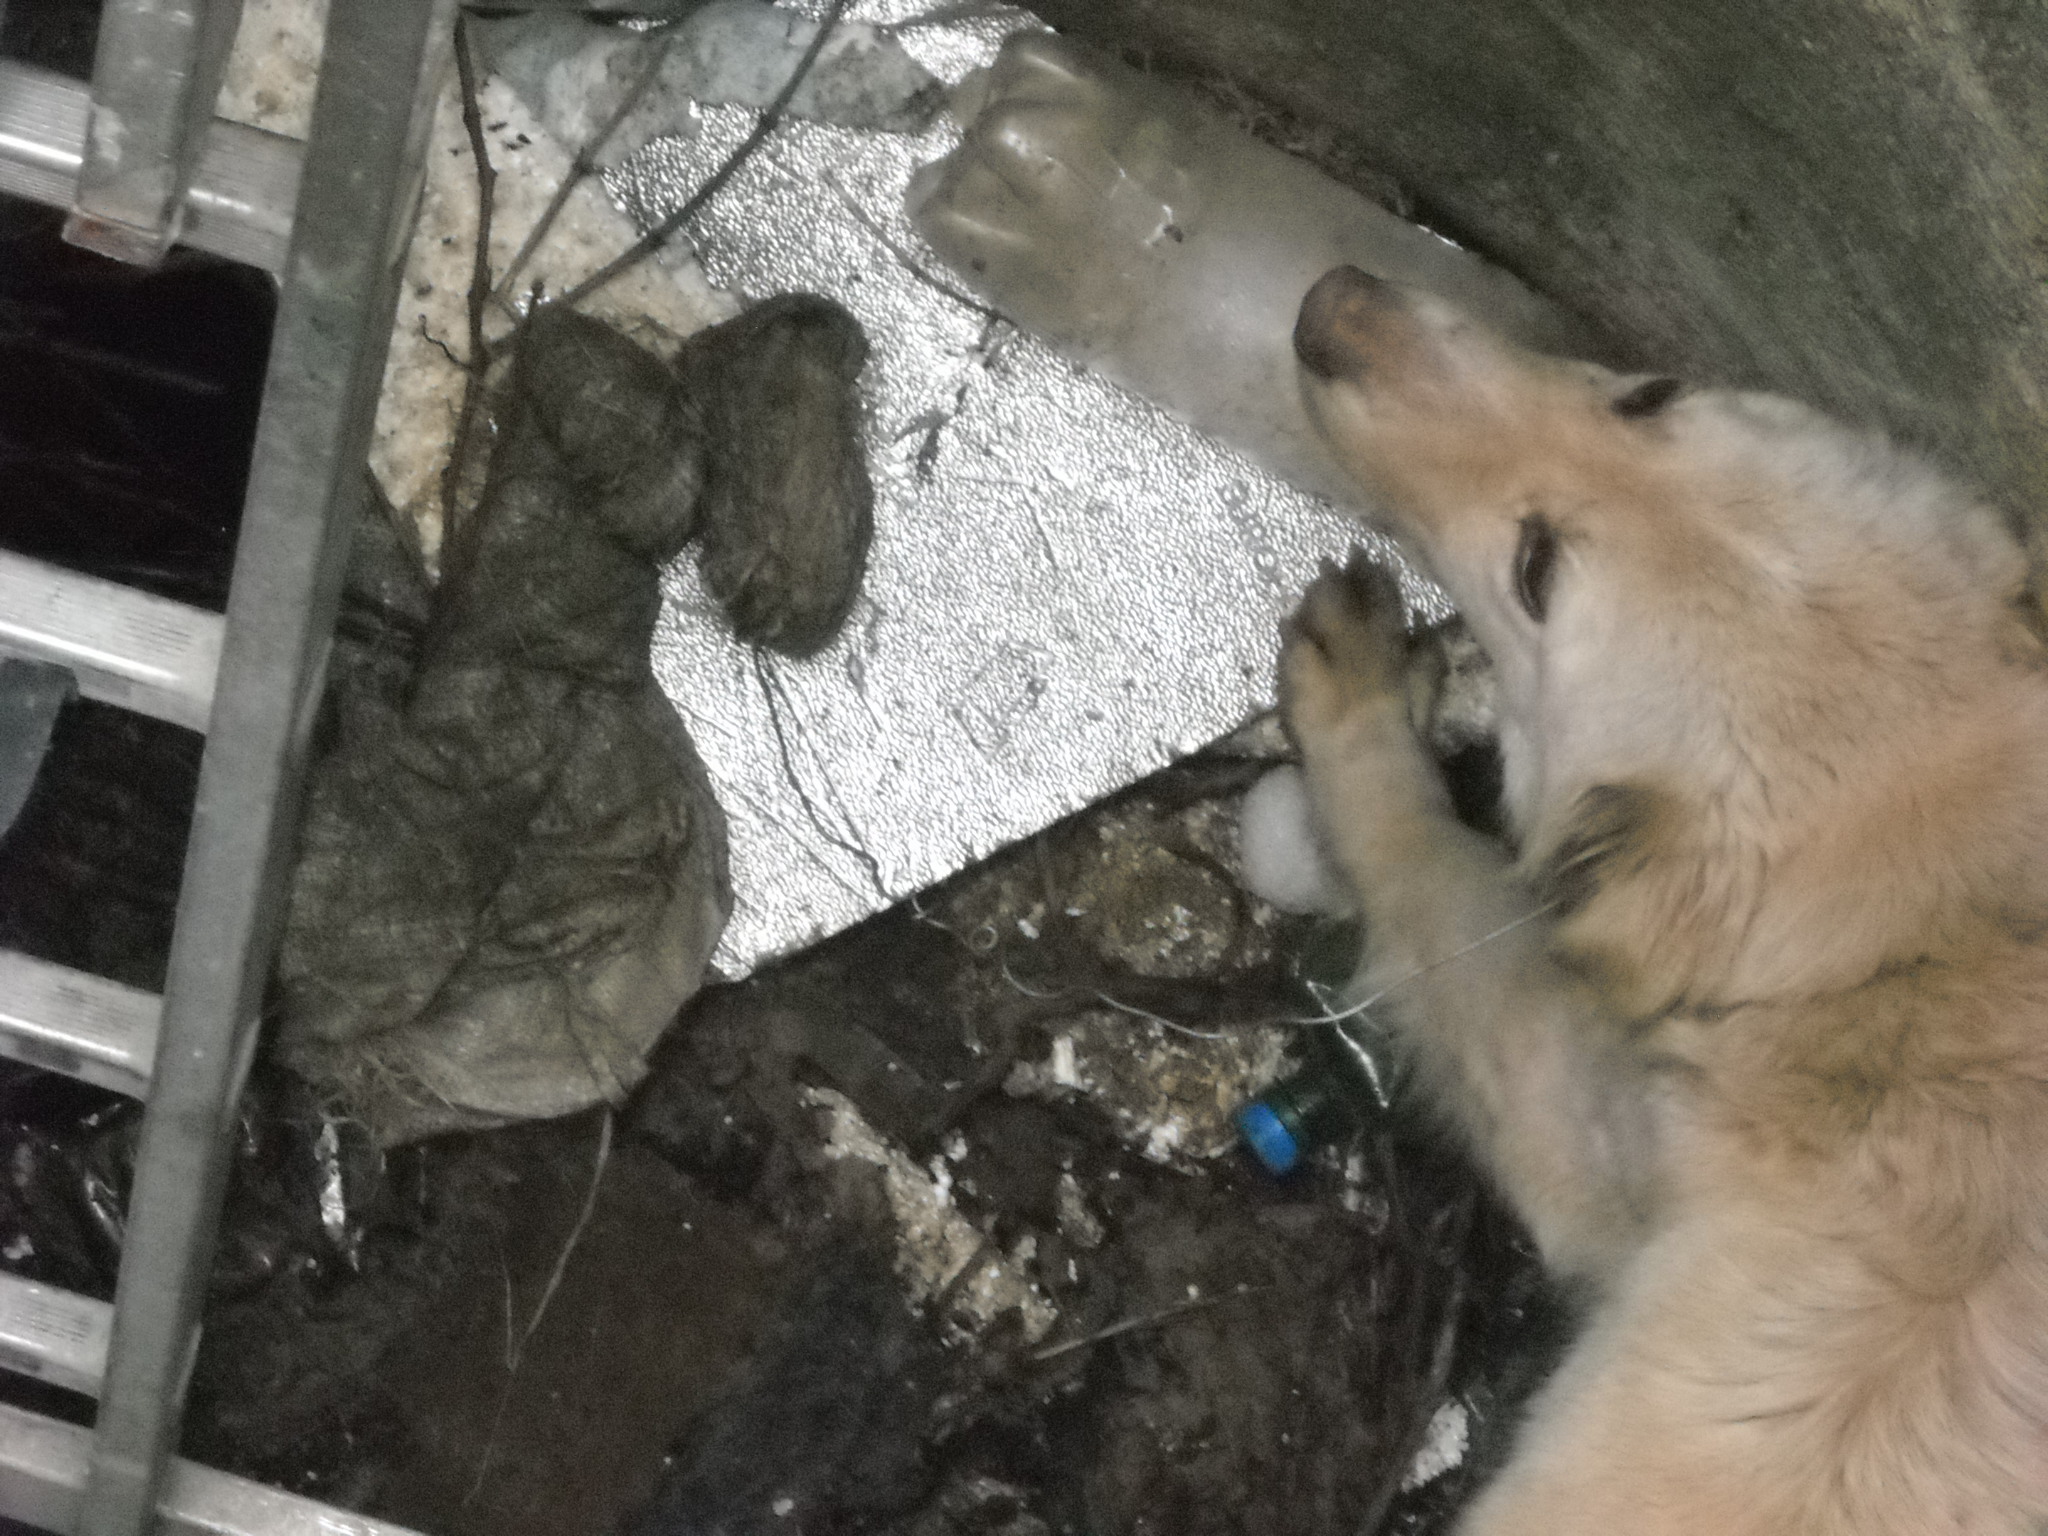 Dog Valentina thrown in a Sewer | RO | 2014